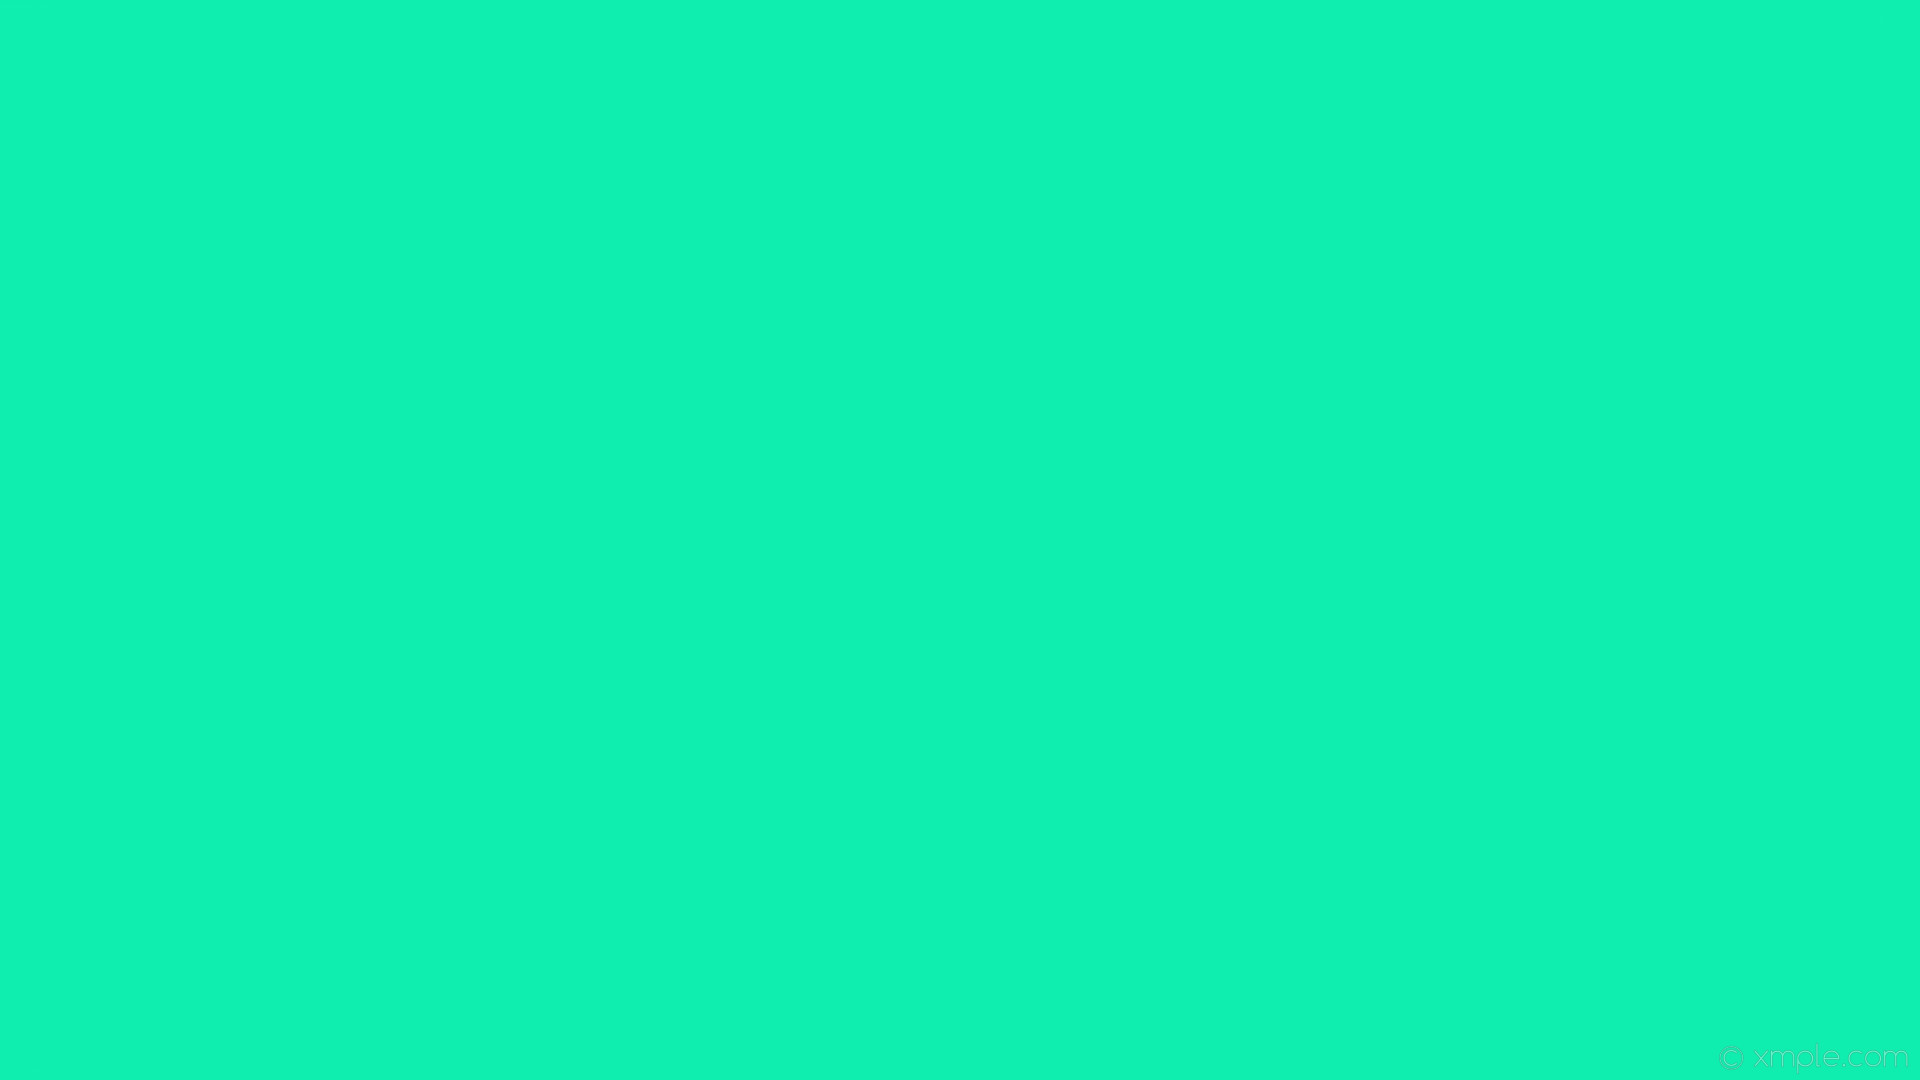 1920x1080 wallpaper plain turquoise one colour single solid color #0feeaf